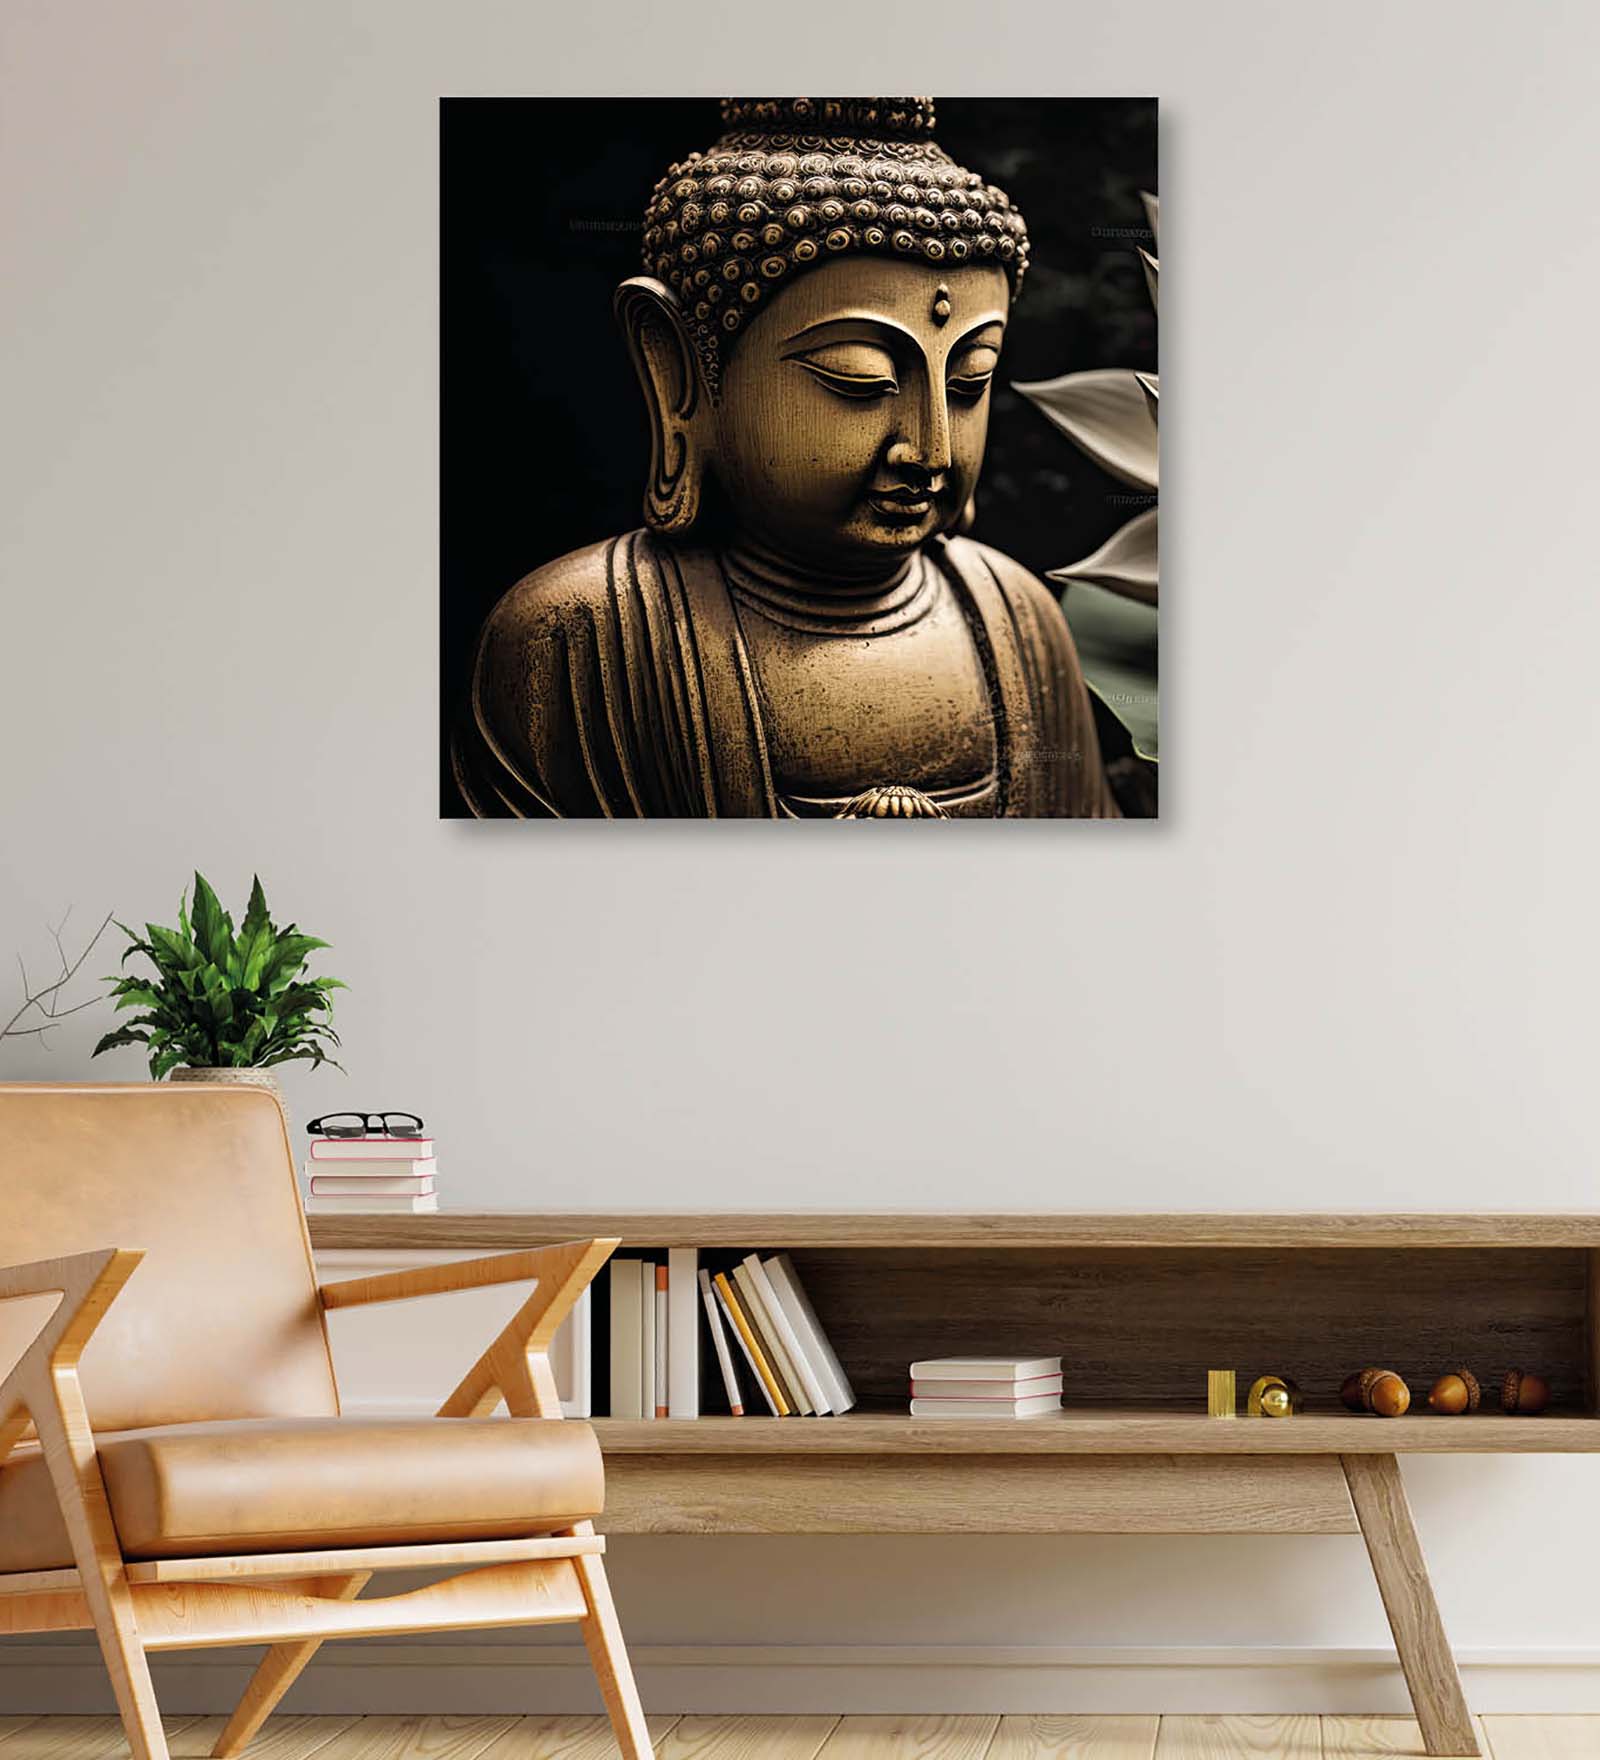 Unique Buddha Canvas Art: Transform Your Home with the Wisdom and Peace of the Buddha